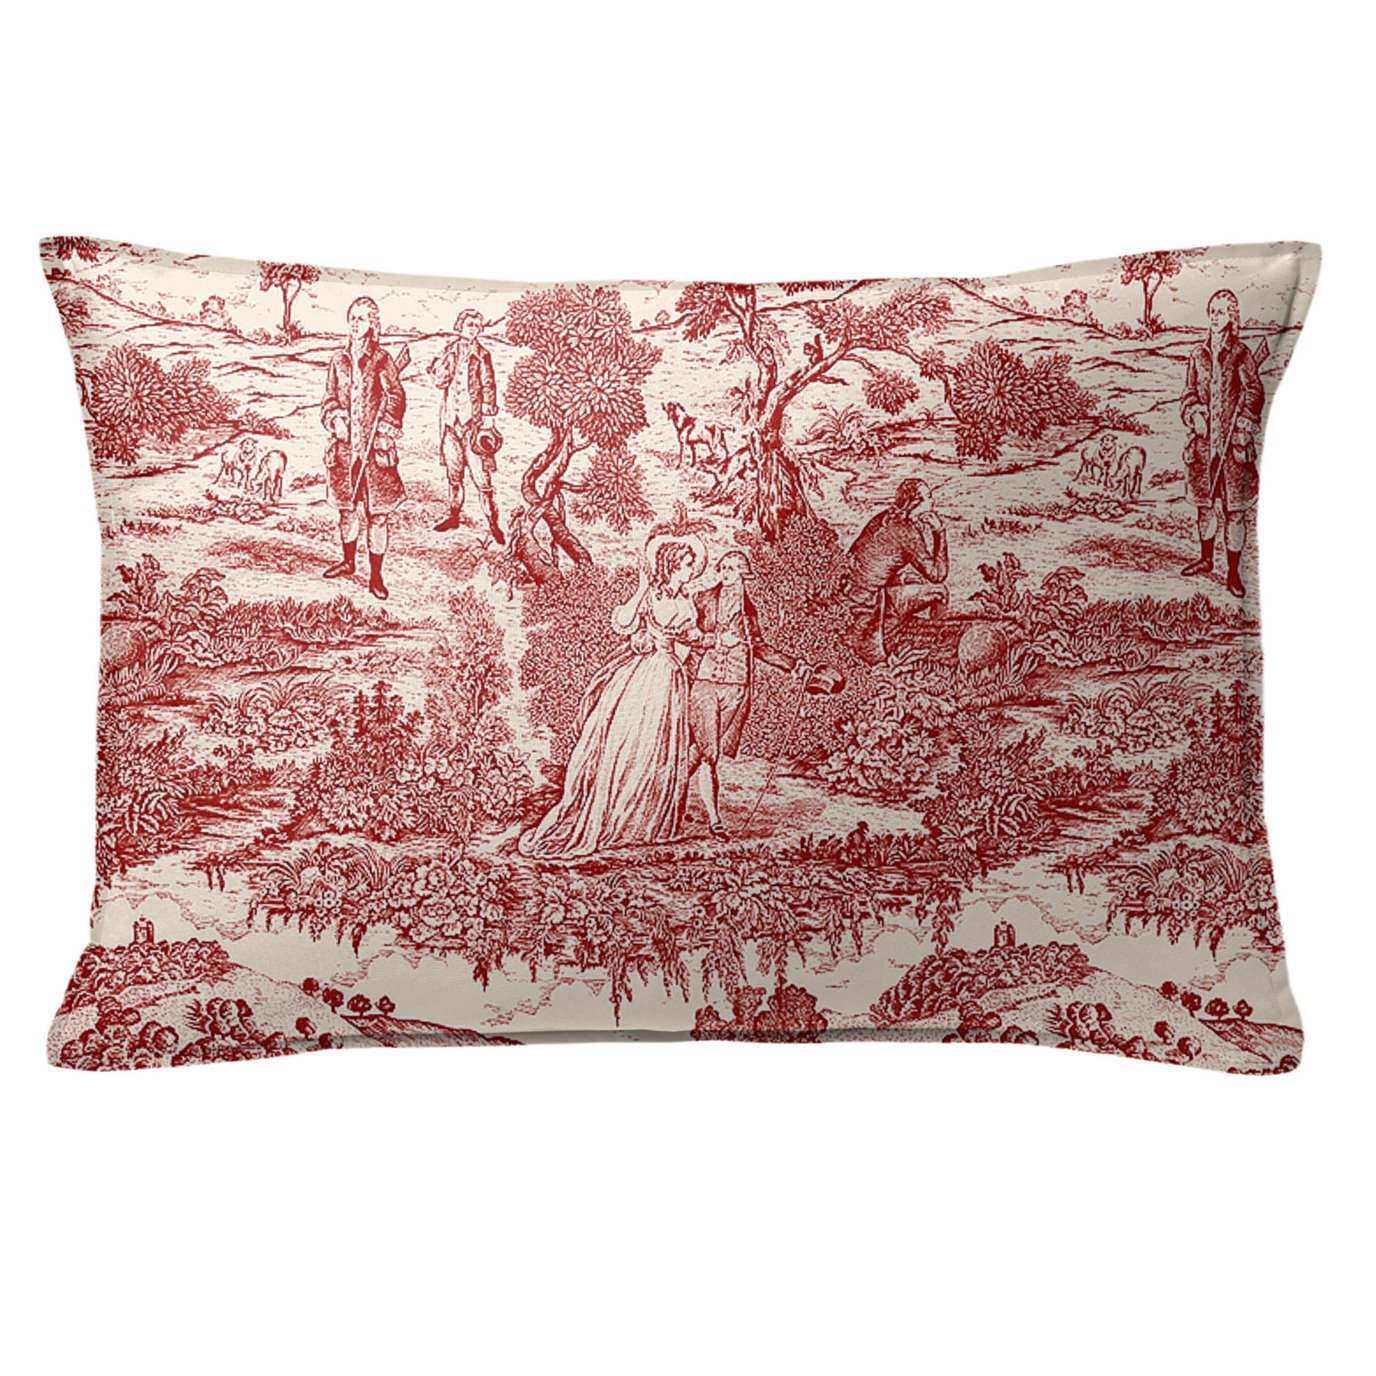 Beau Toile Red Decorative Pillow - Size 14"x20" Rectangle